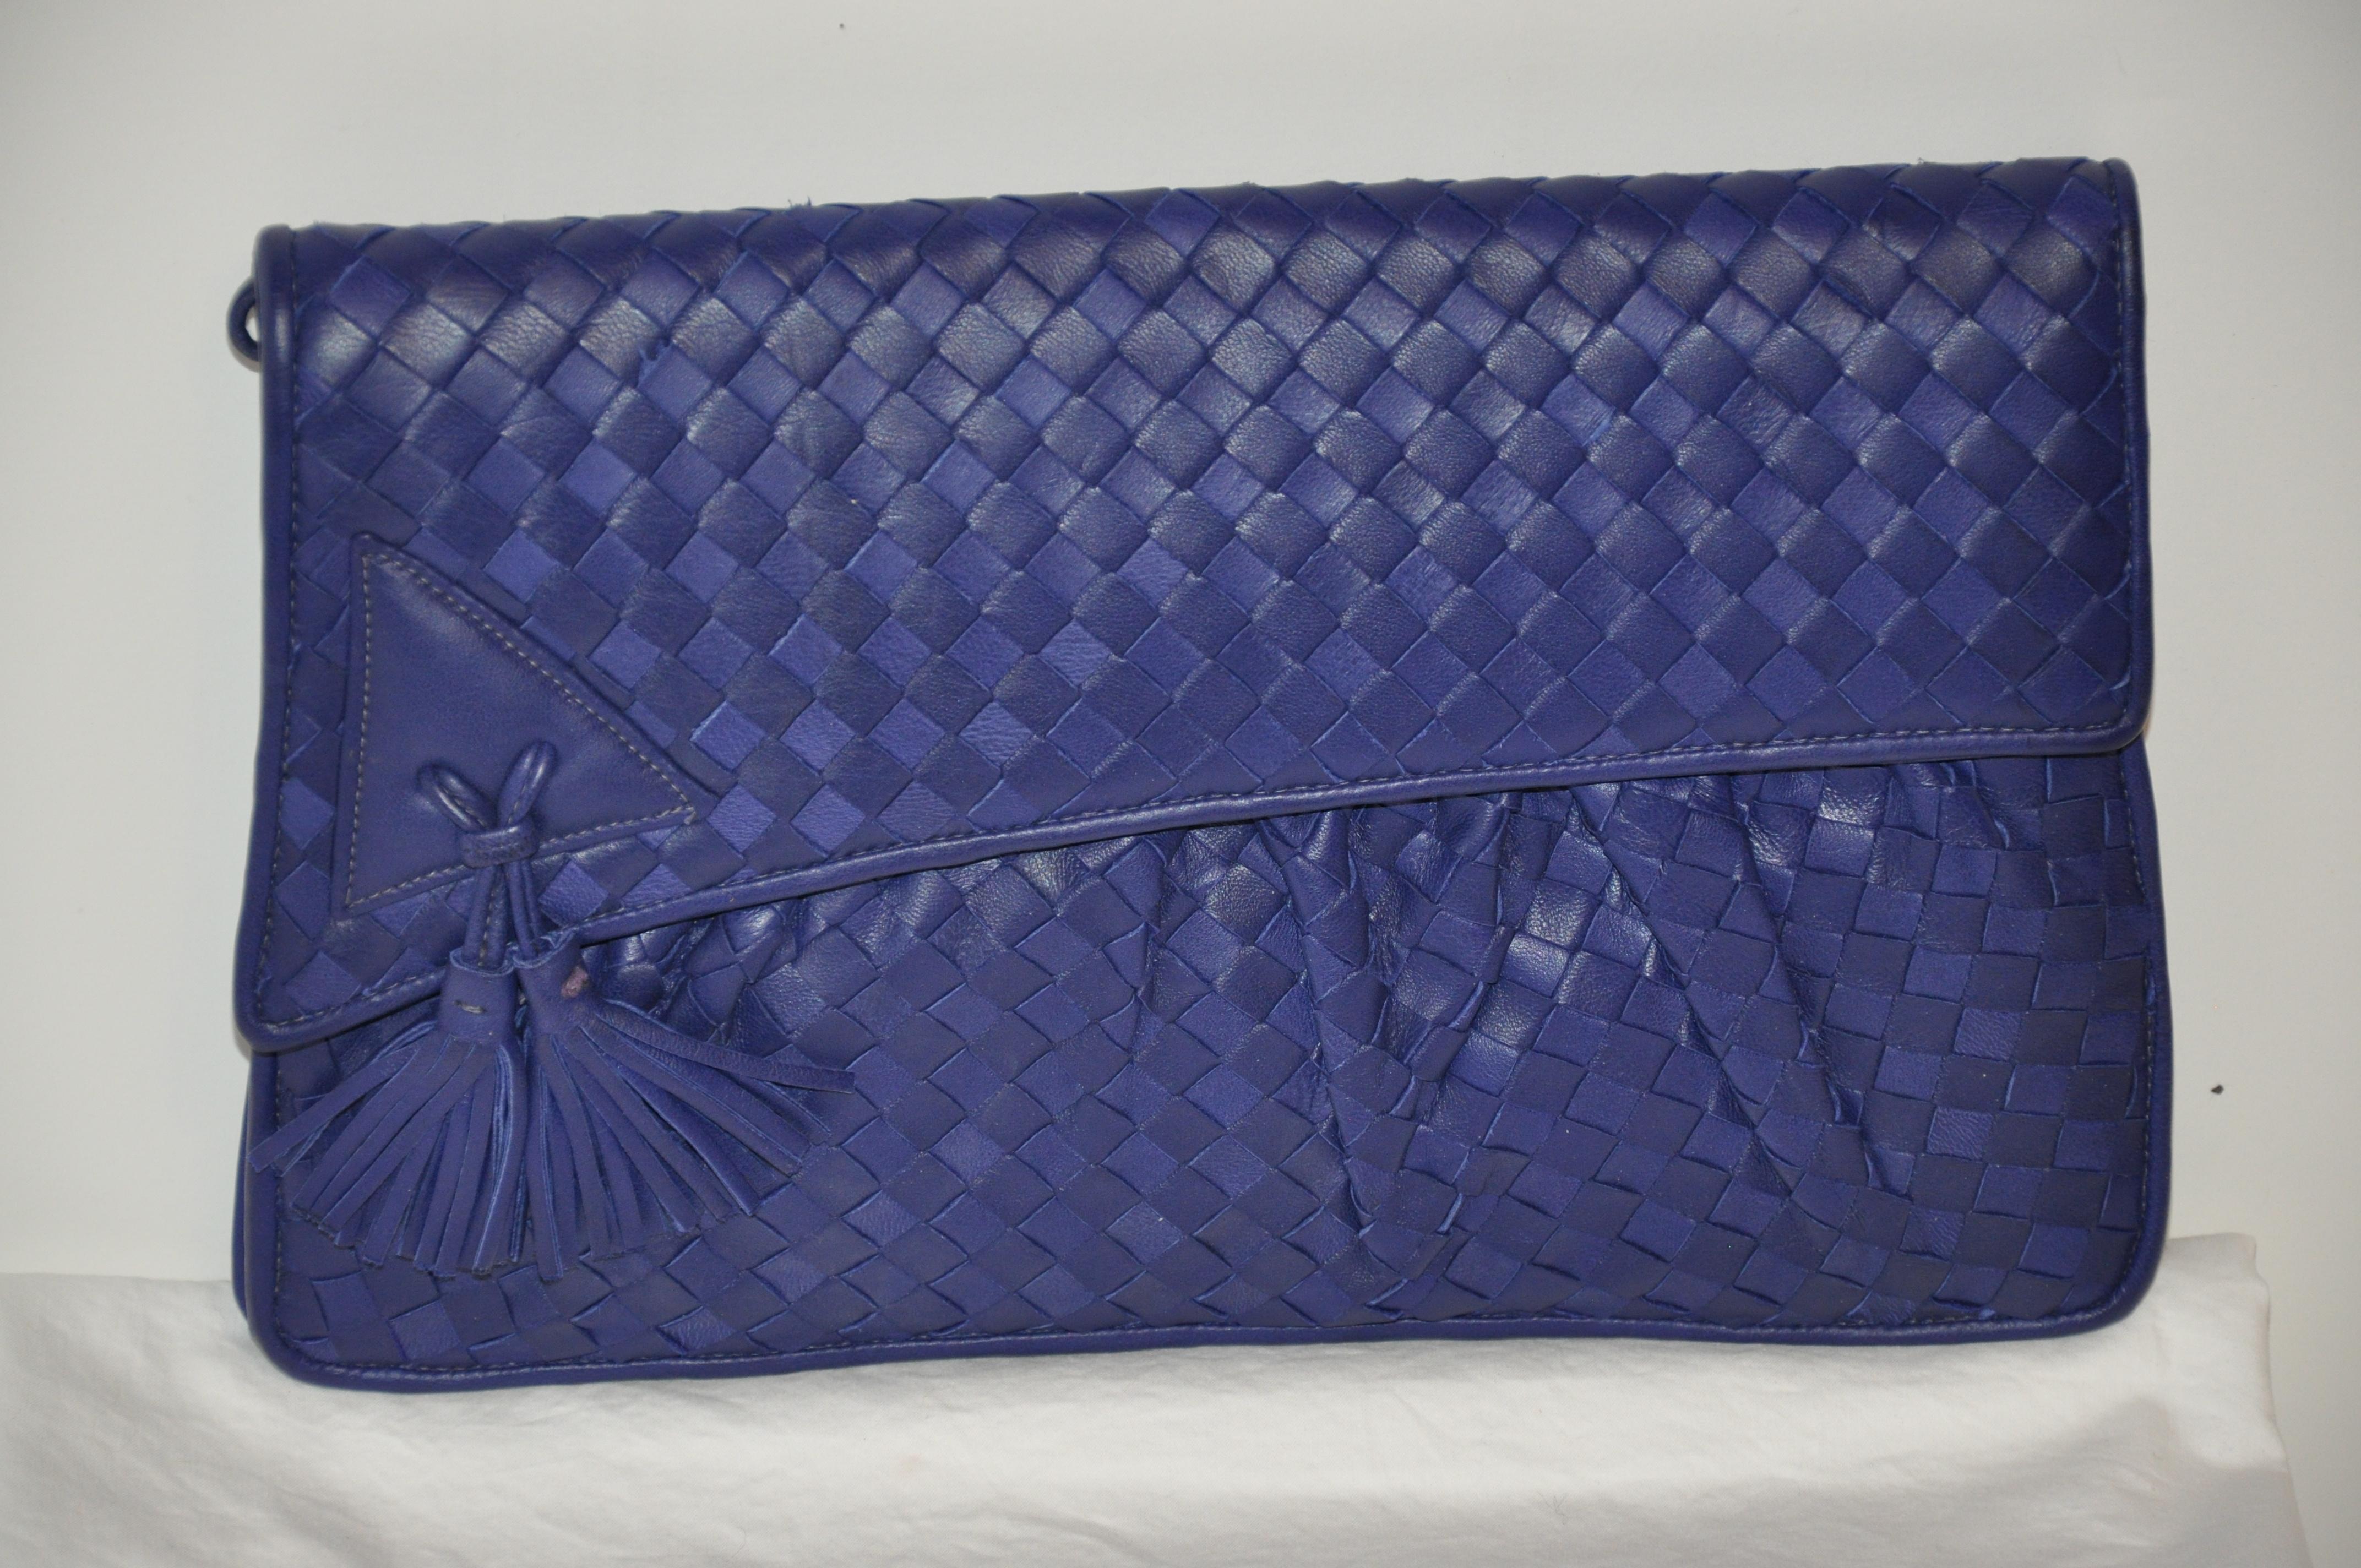 Myers Deep Lapis-Blue Soft Woven Lambskin Clutch with Optional Shoulder Straps For Sale 1